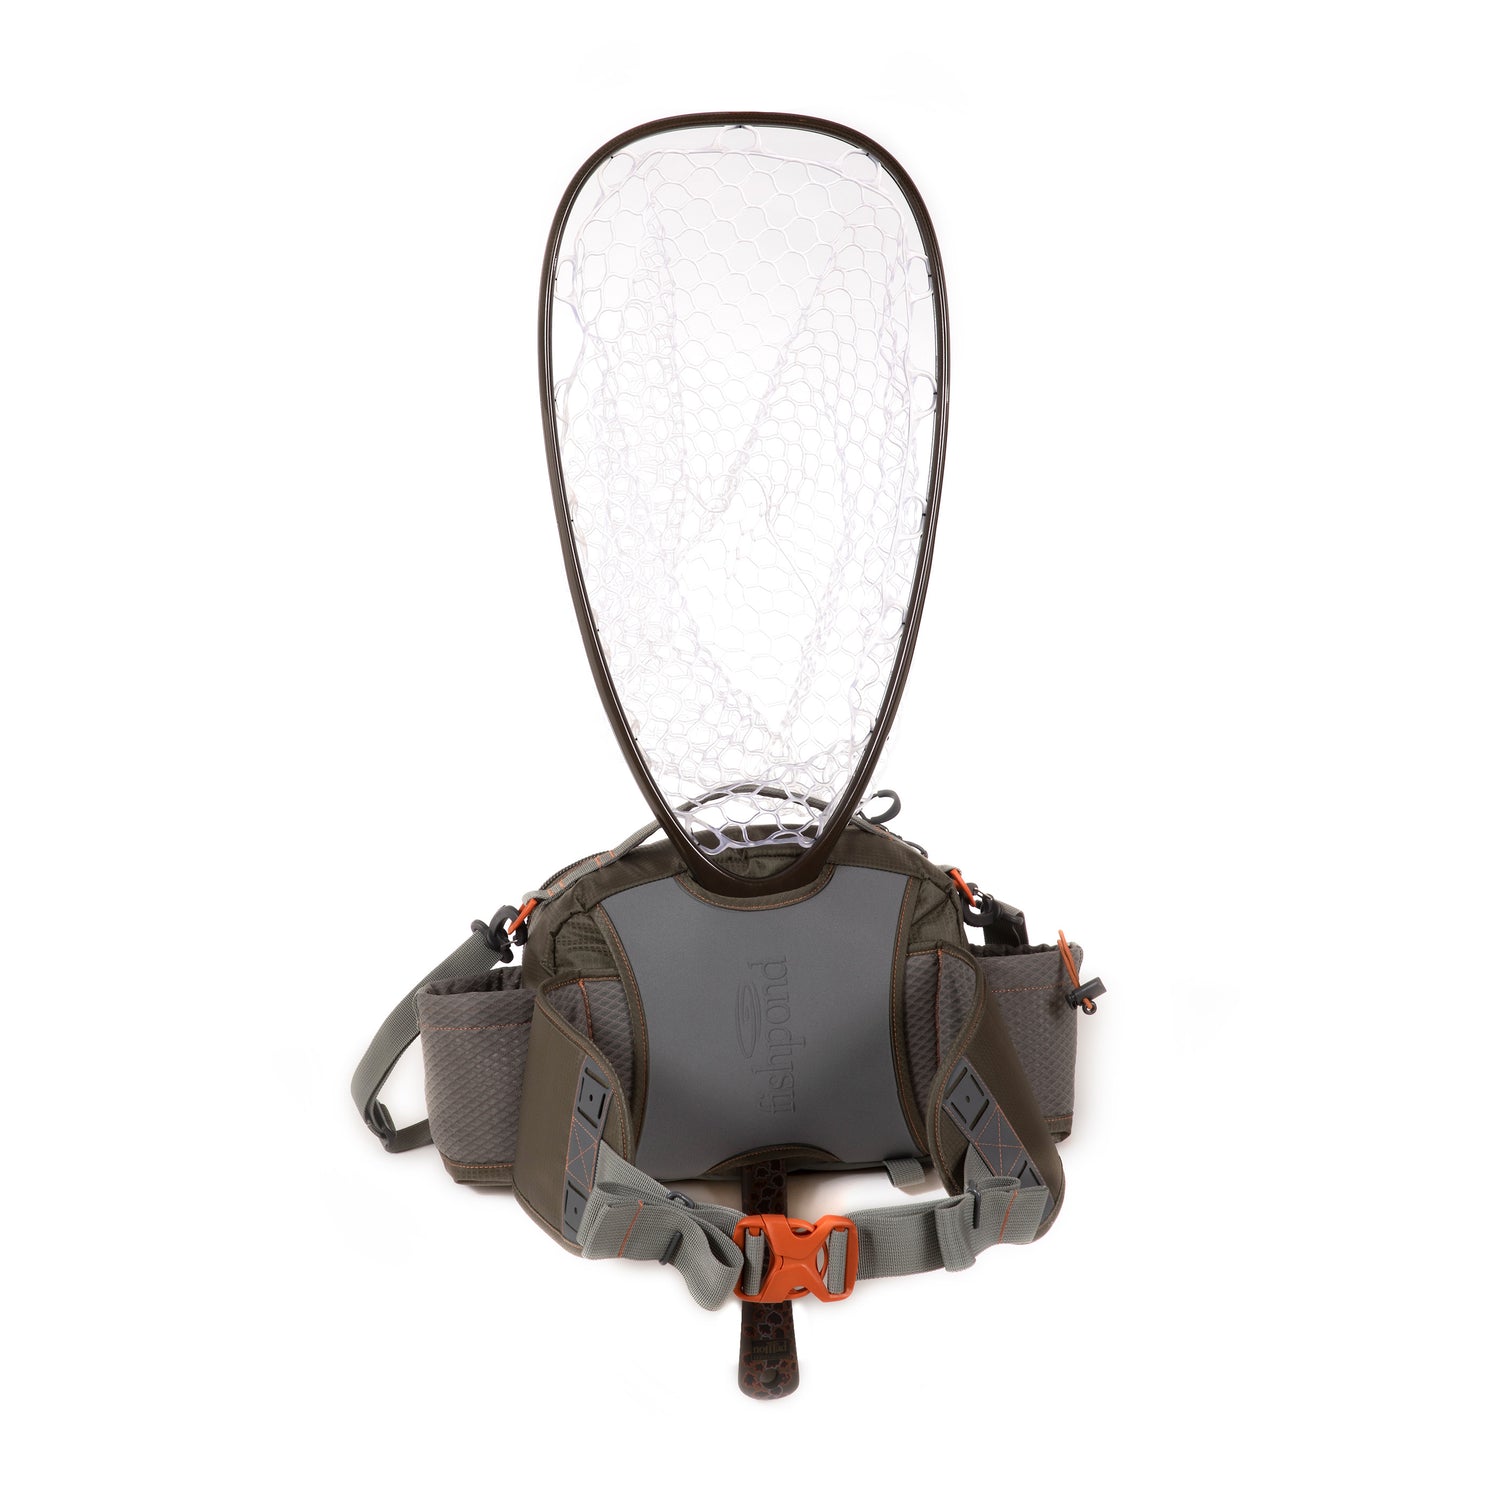 WHAT'S IN MY CHEST PACK FOR STEELHEAD FISHING? - I show each piece